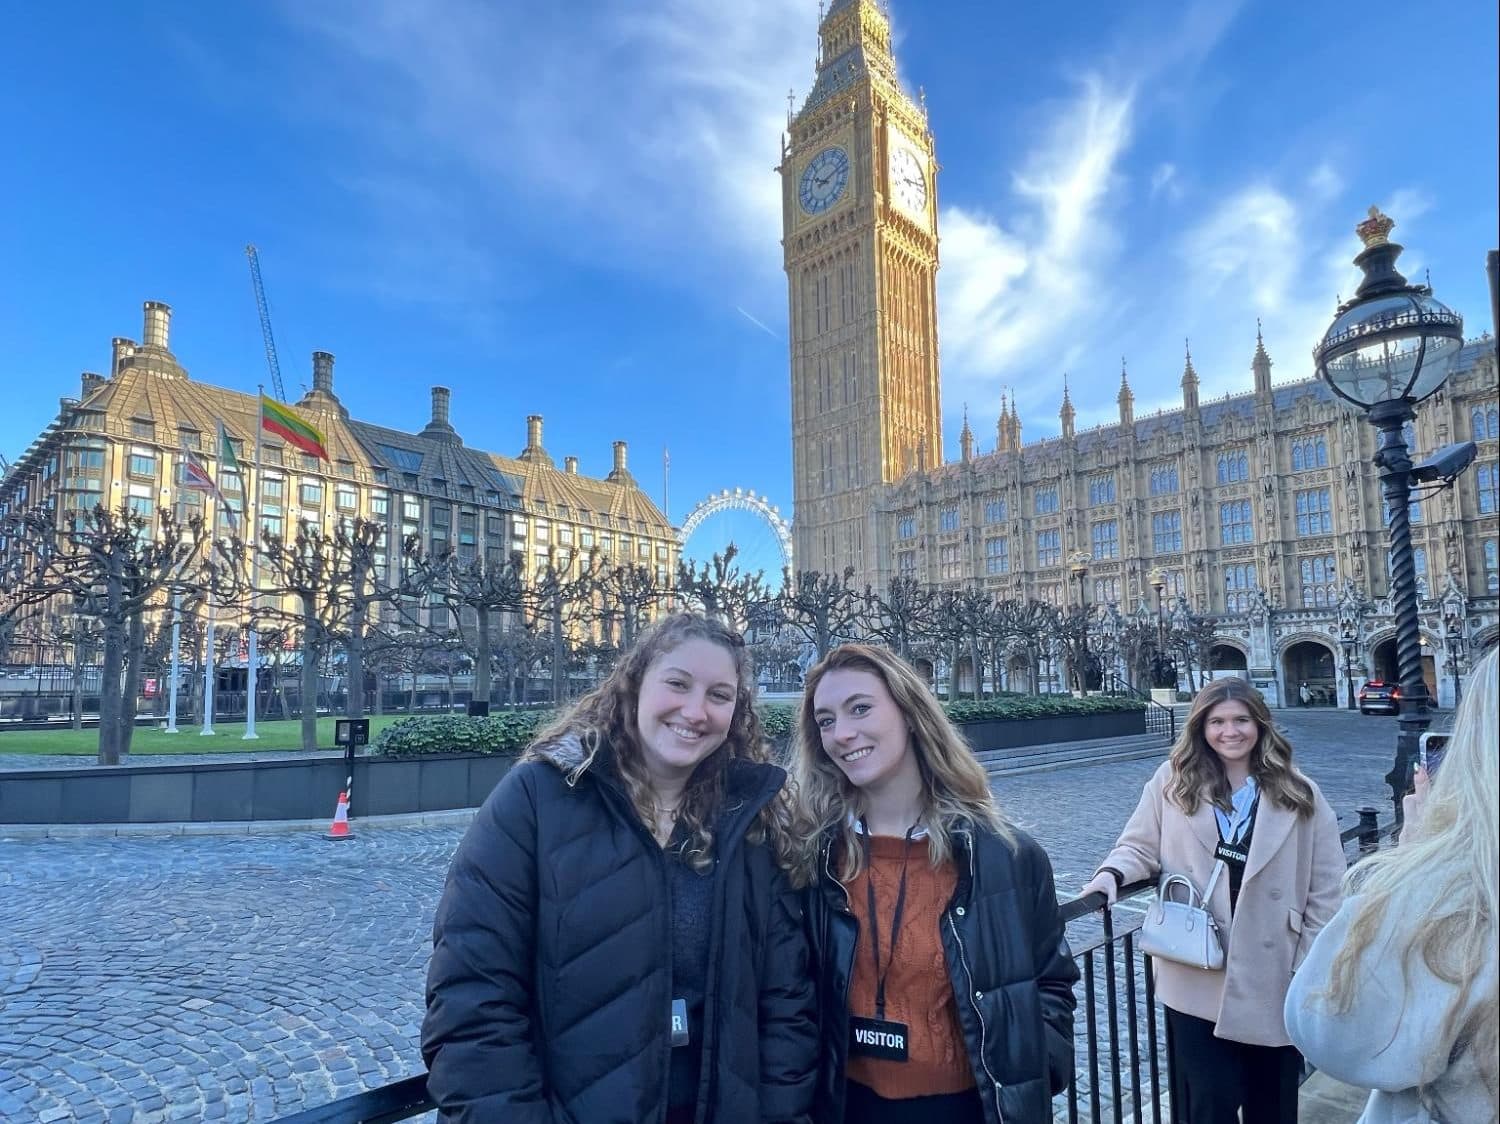 Two students in front of Big Ben and the London Eye in London, England.